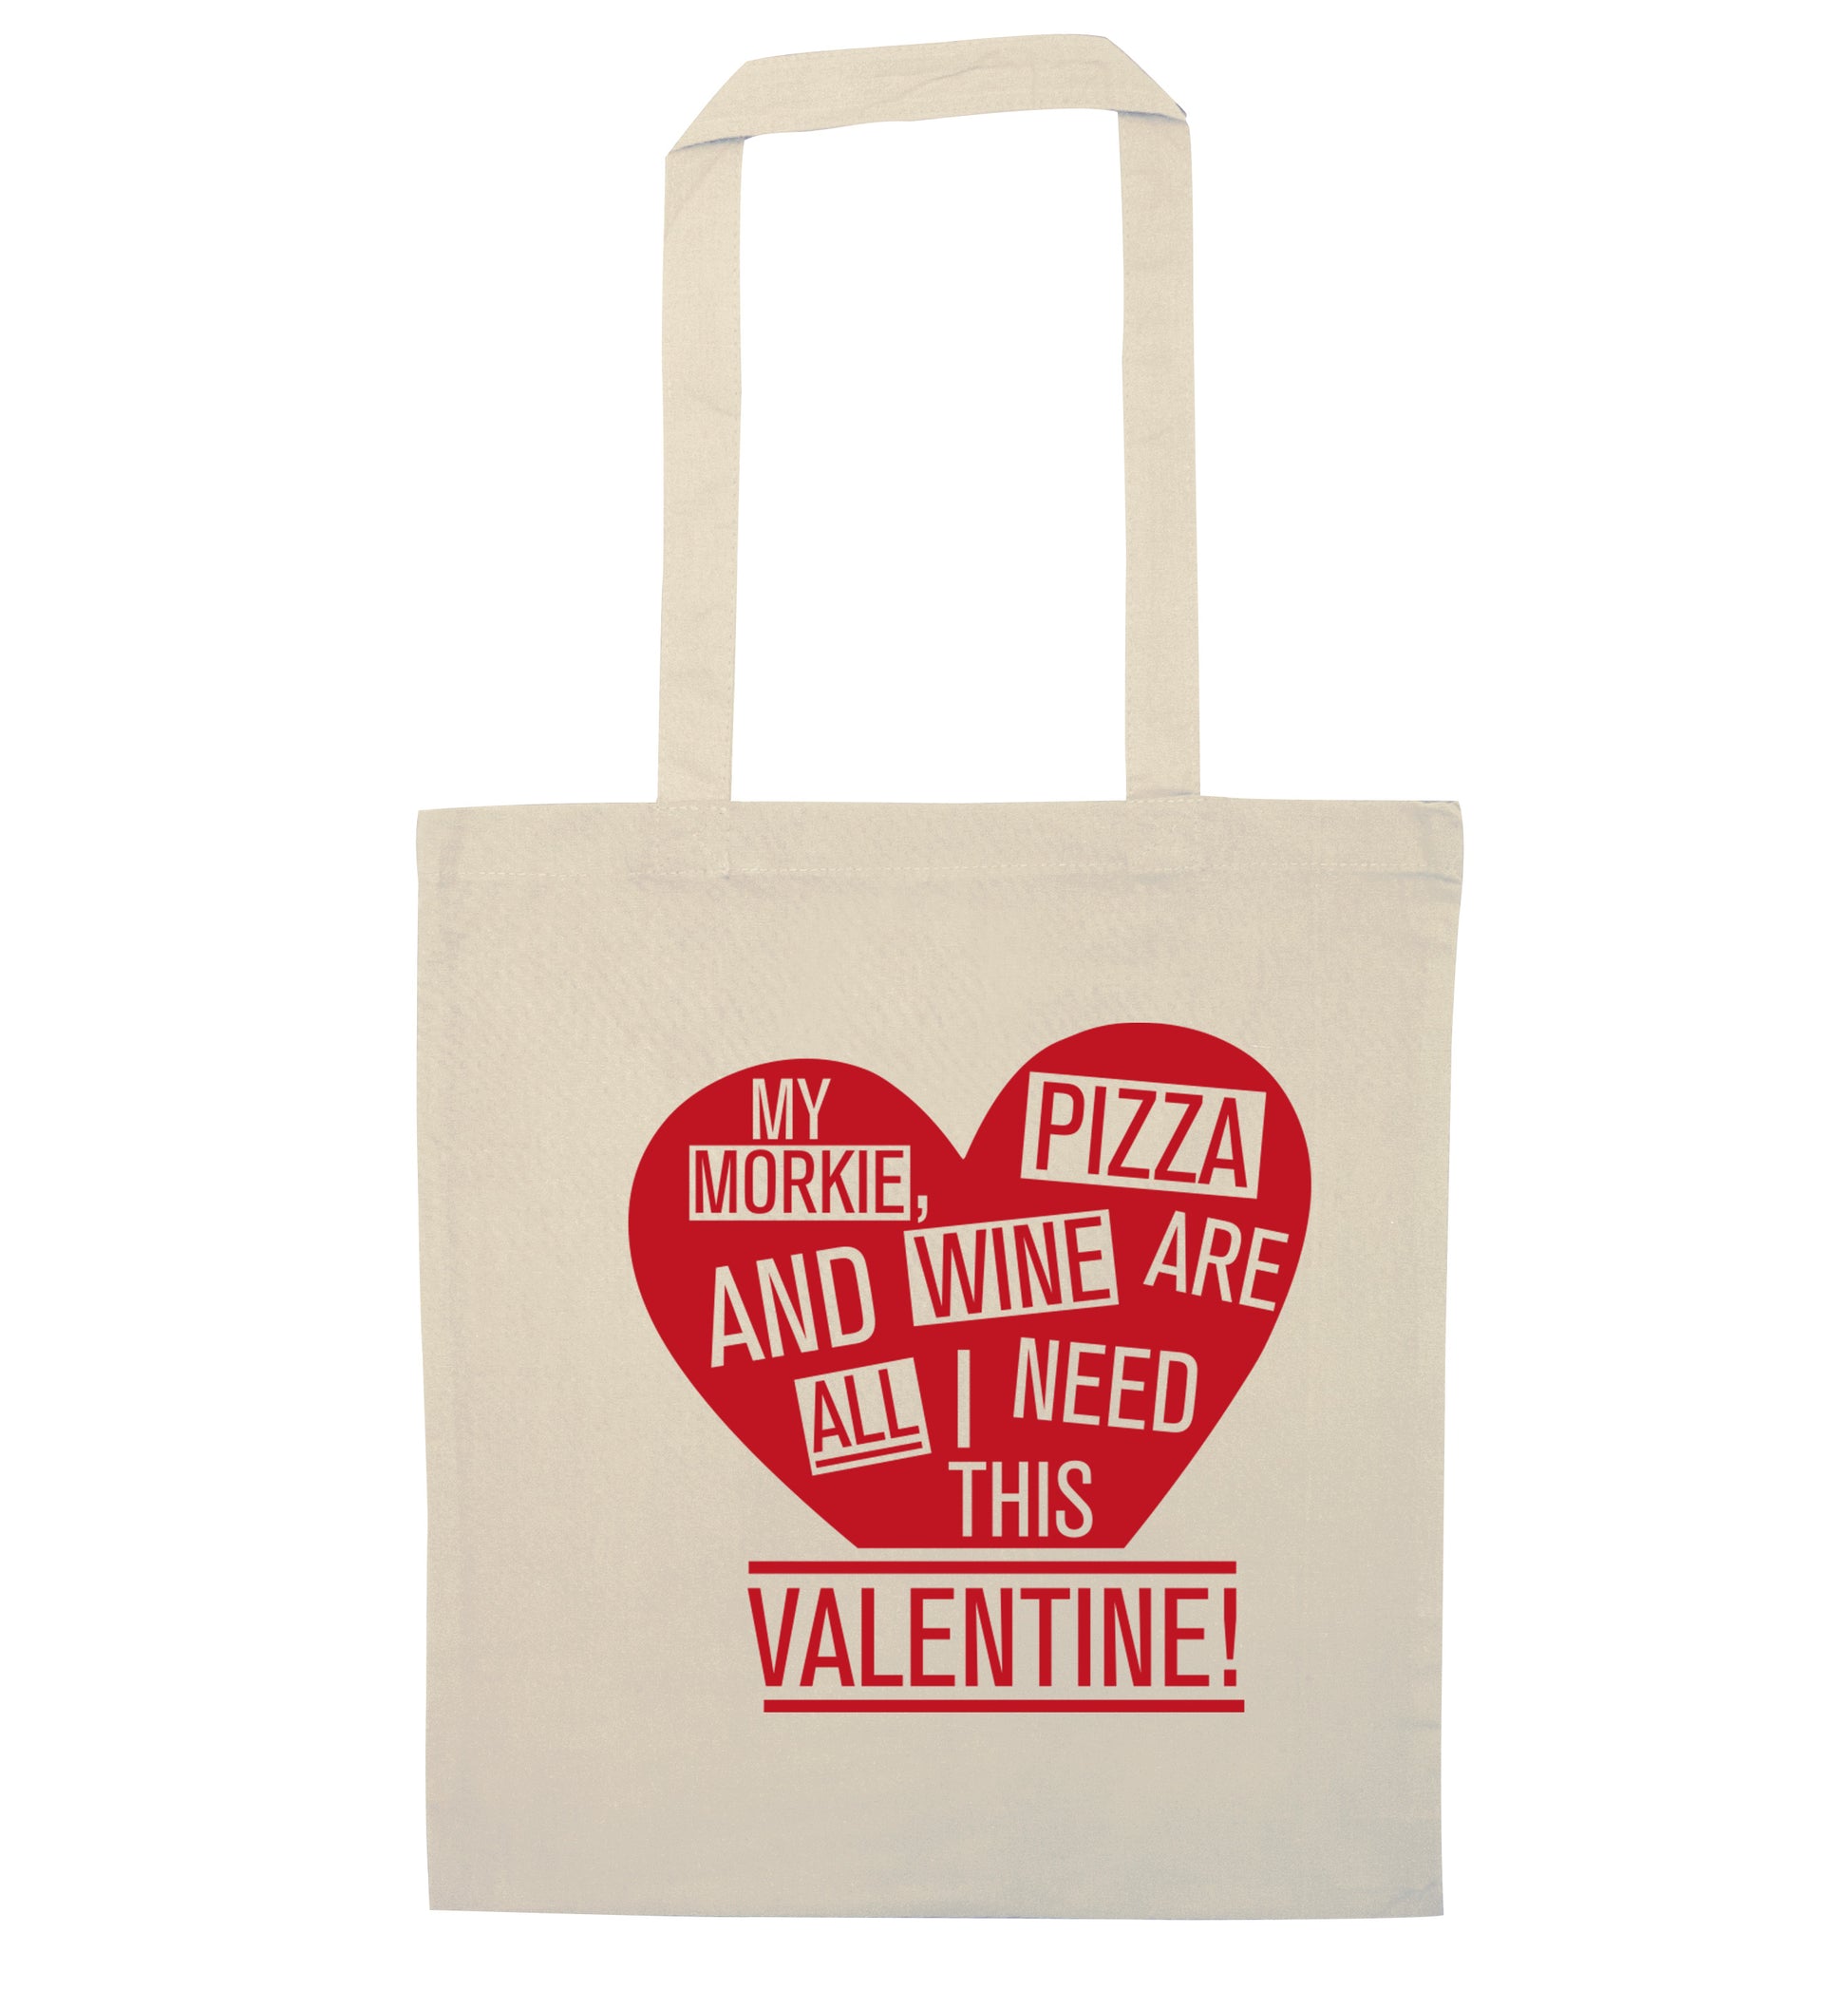 My morkie, pizza and wine are all I need this valentine! natural tote bag